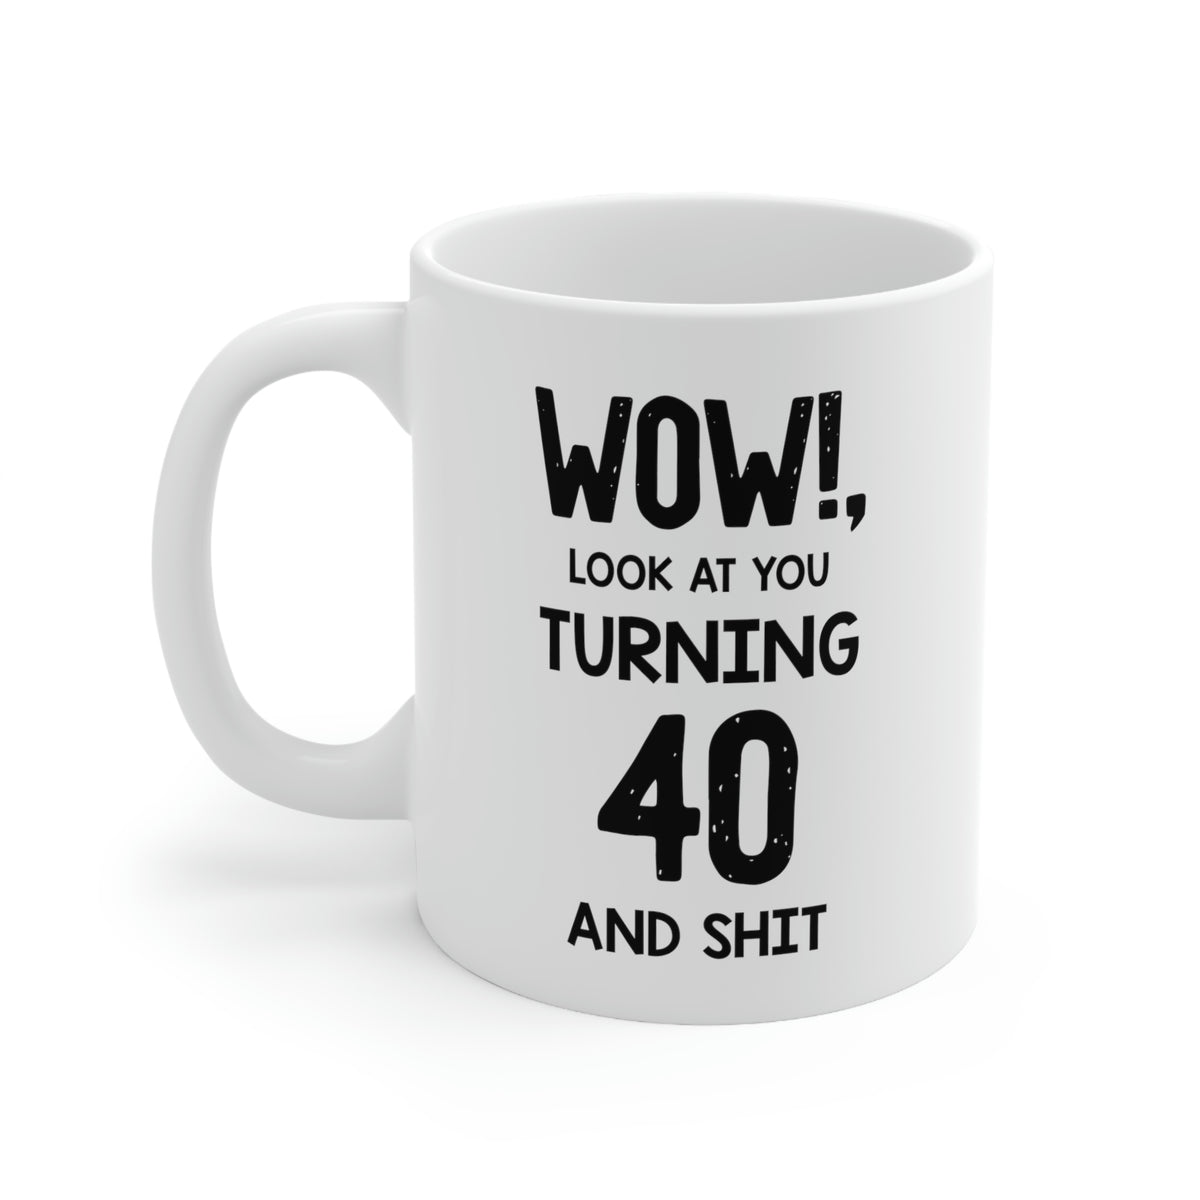 40th Funny Birthday Mug, Wow!, Look At You Turning 40 And Shit, Happy Birthday For 50 Years Old Dad Mom Brother Sister